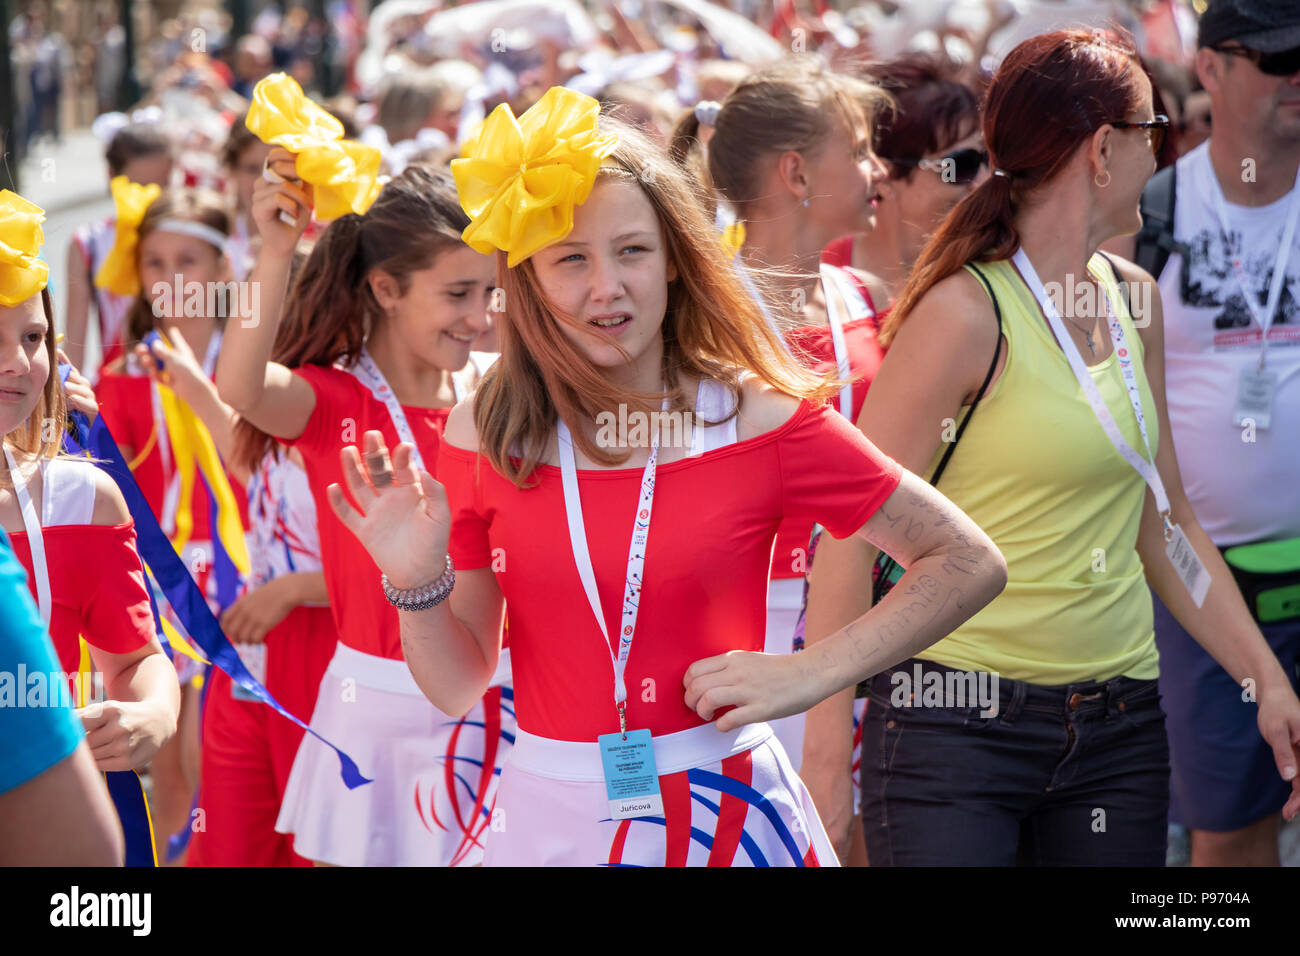 PRAGUE, CZECH REPUBLIC - JULY 1, 2018: People parading at Sokolsky Slet, a once-every-six-years gathering of the Sokol movement - a Czech sports assoc Stock Photo